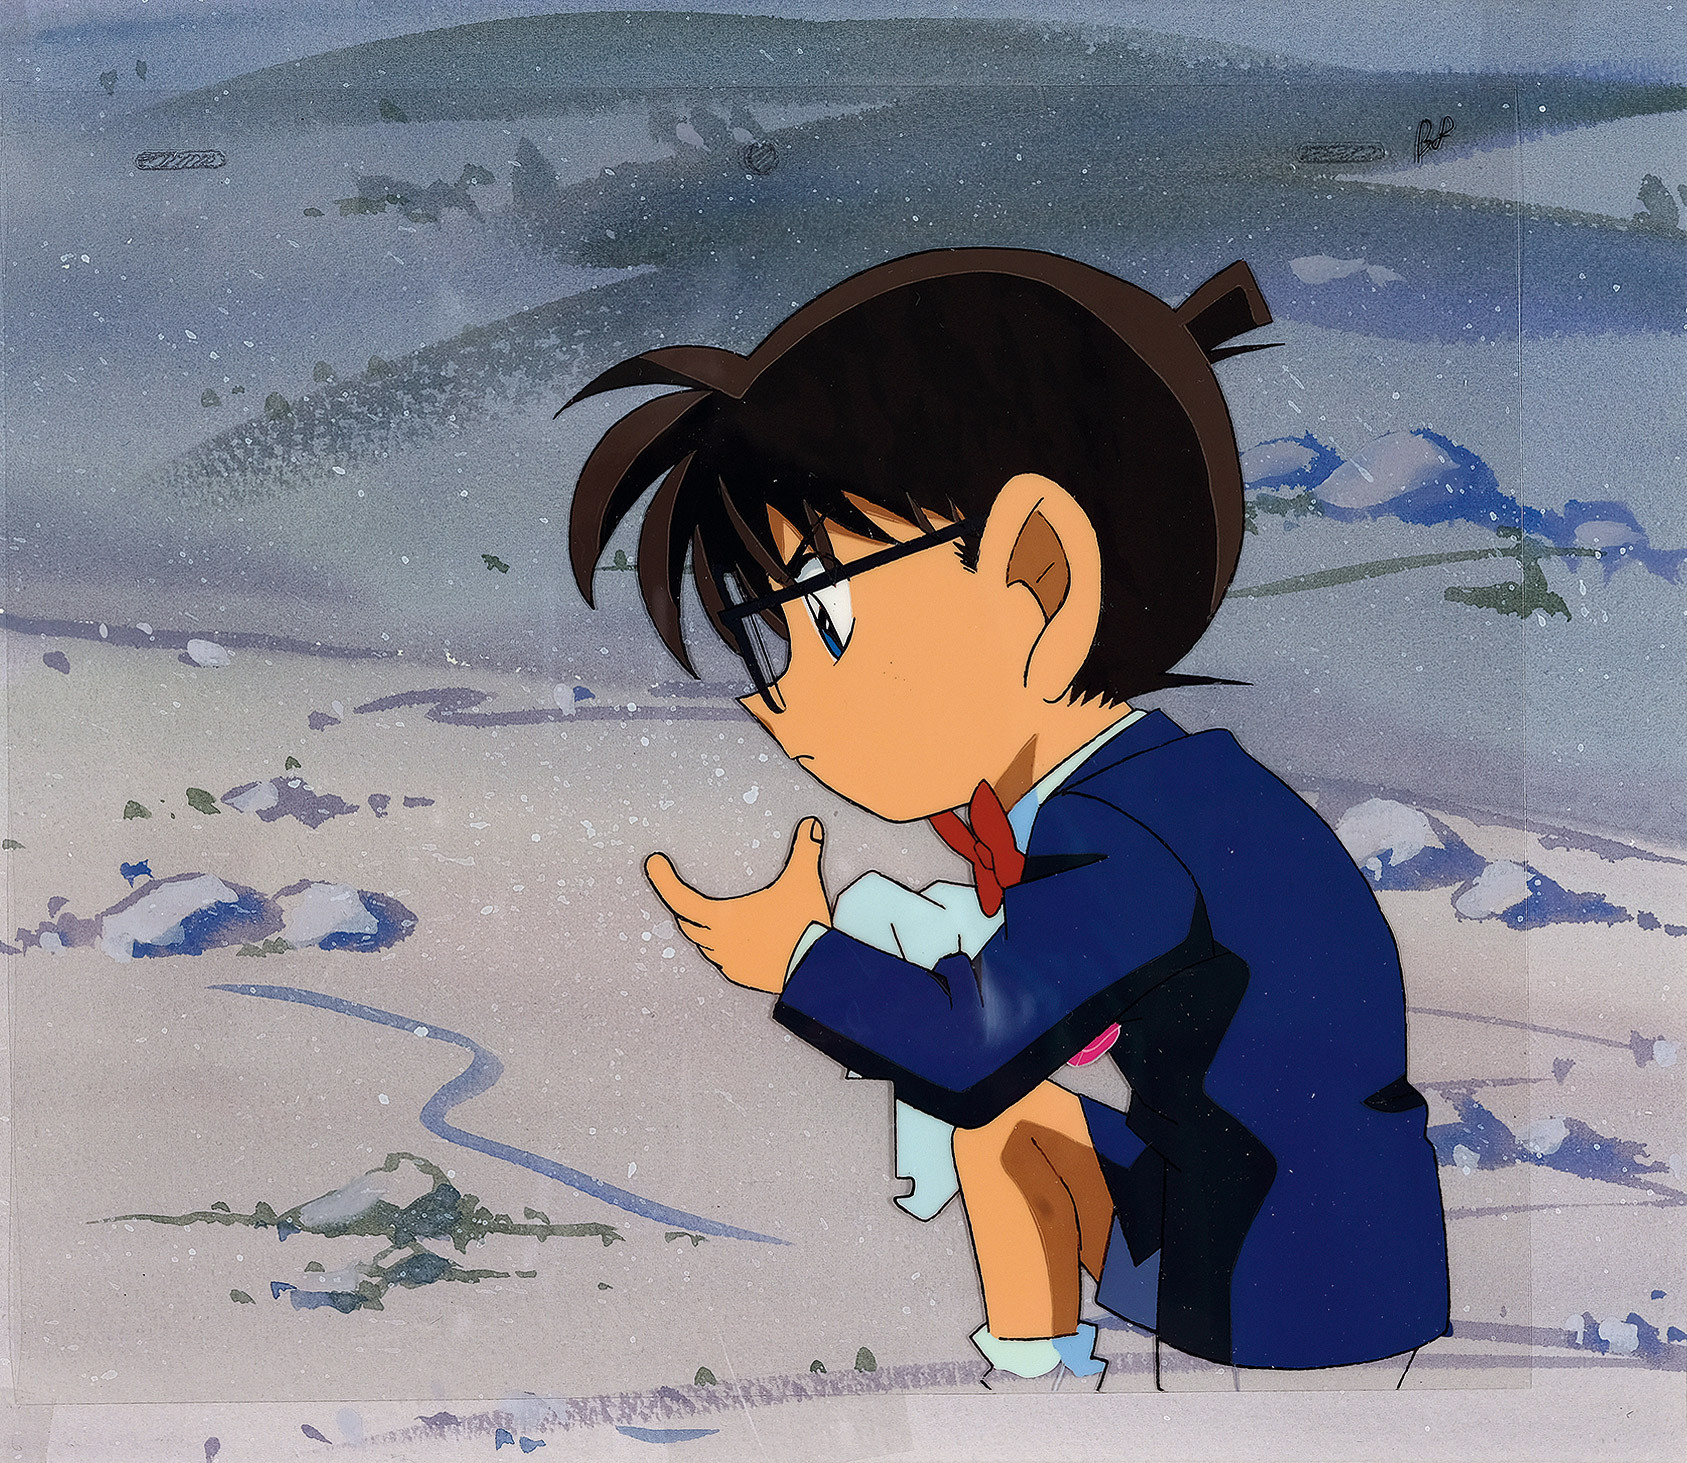 CONAN SEARCHING AT THE SNOWFIELD